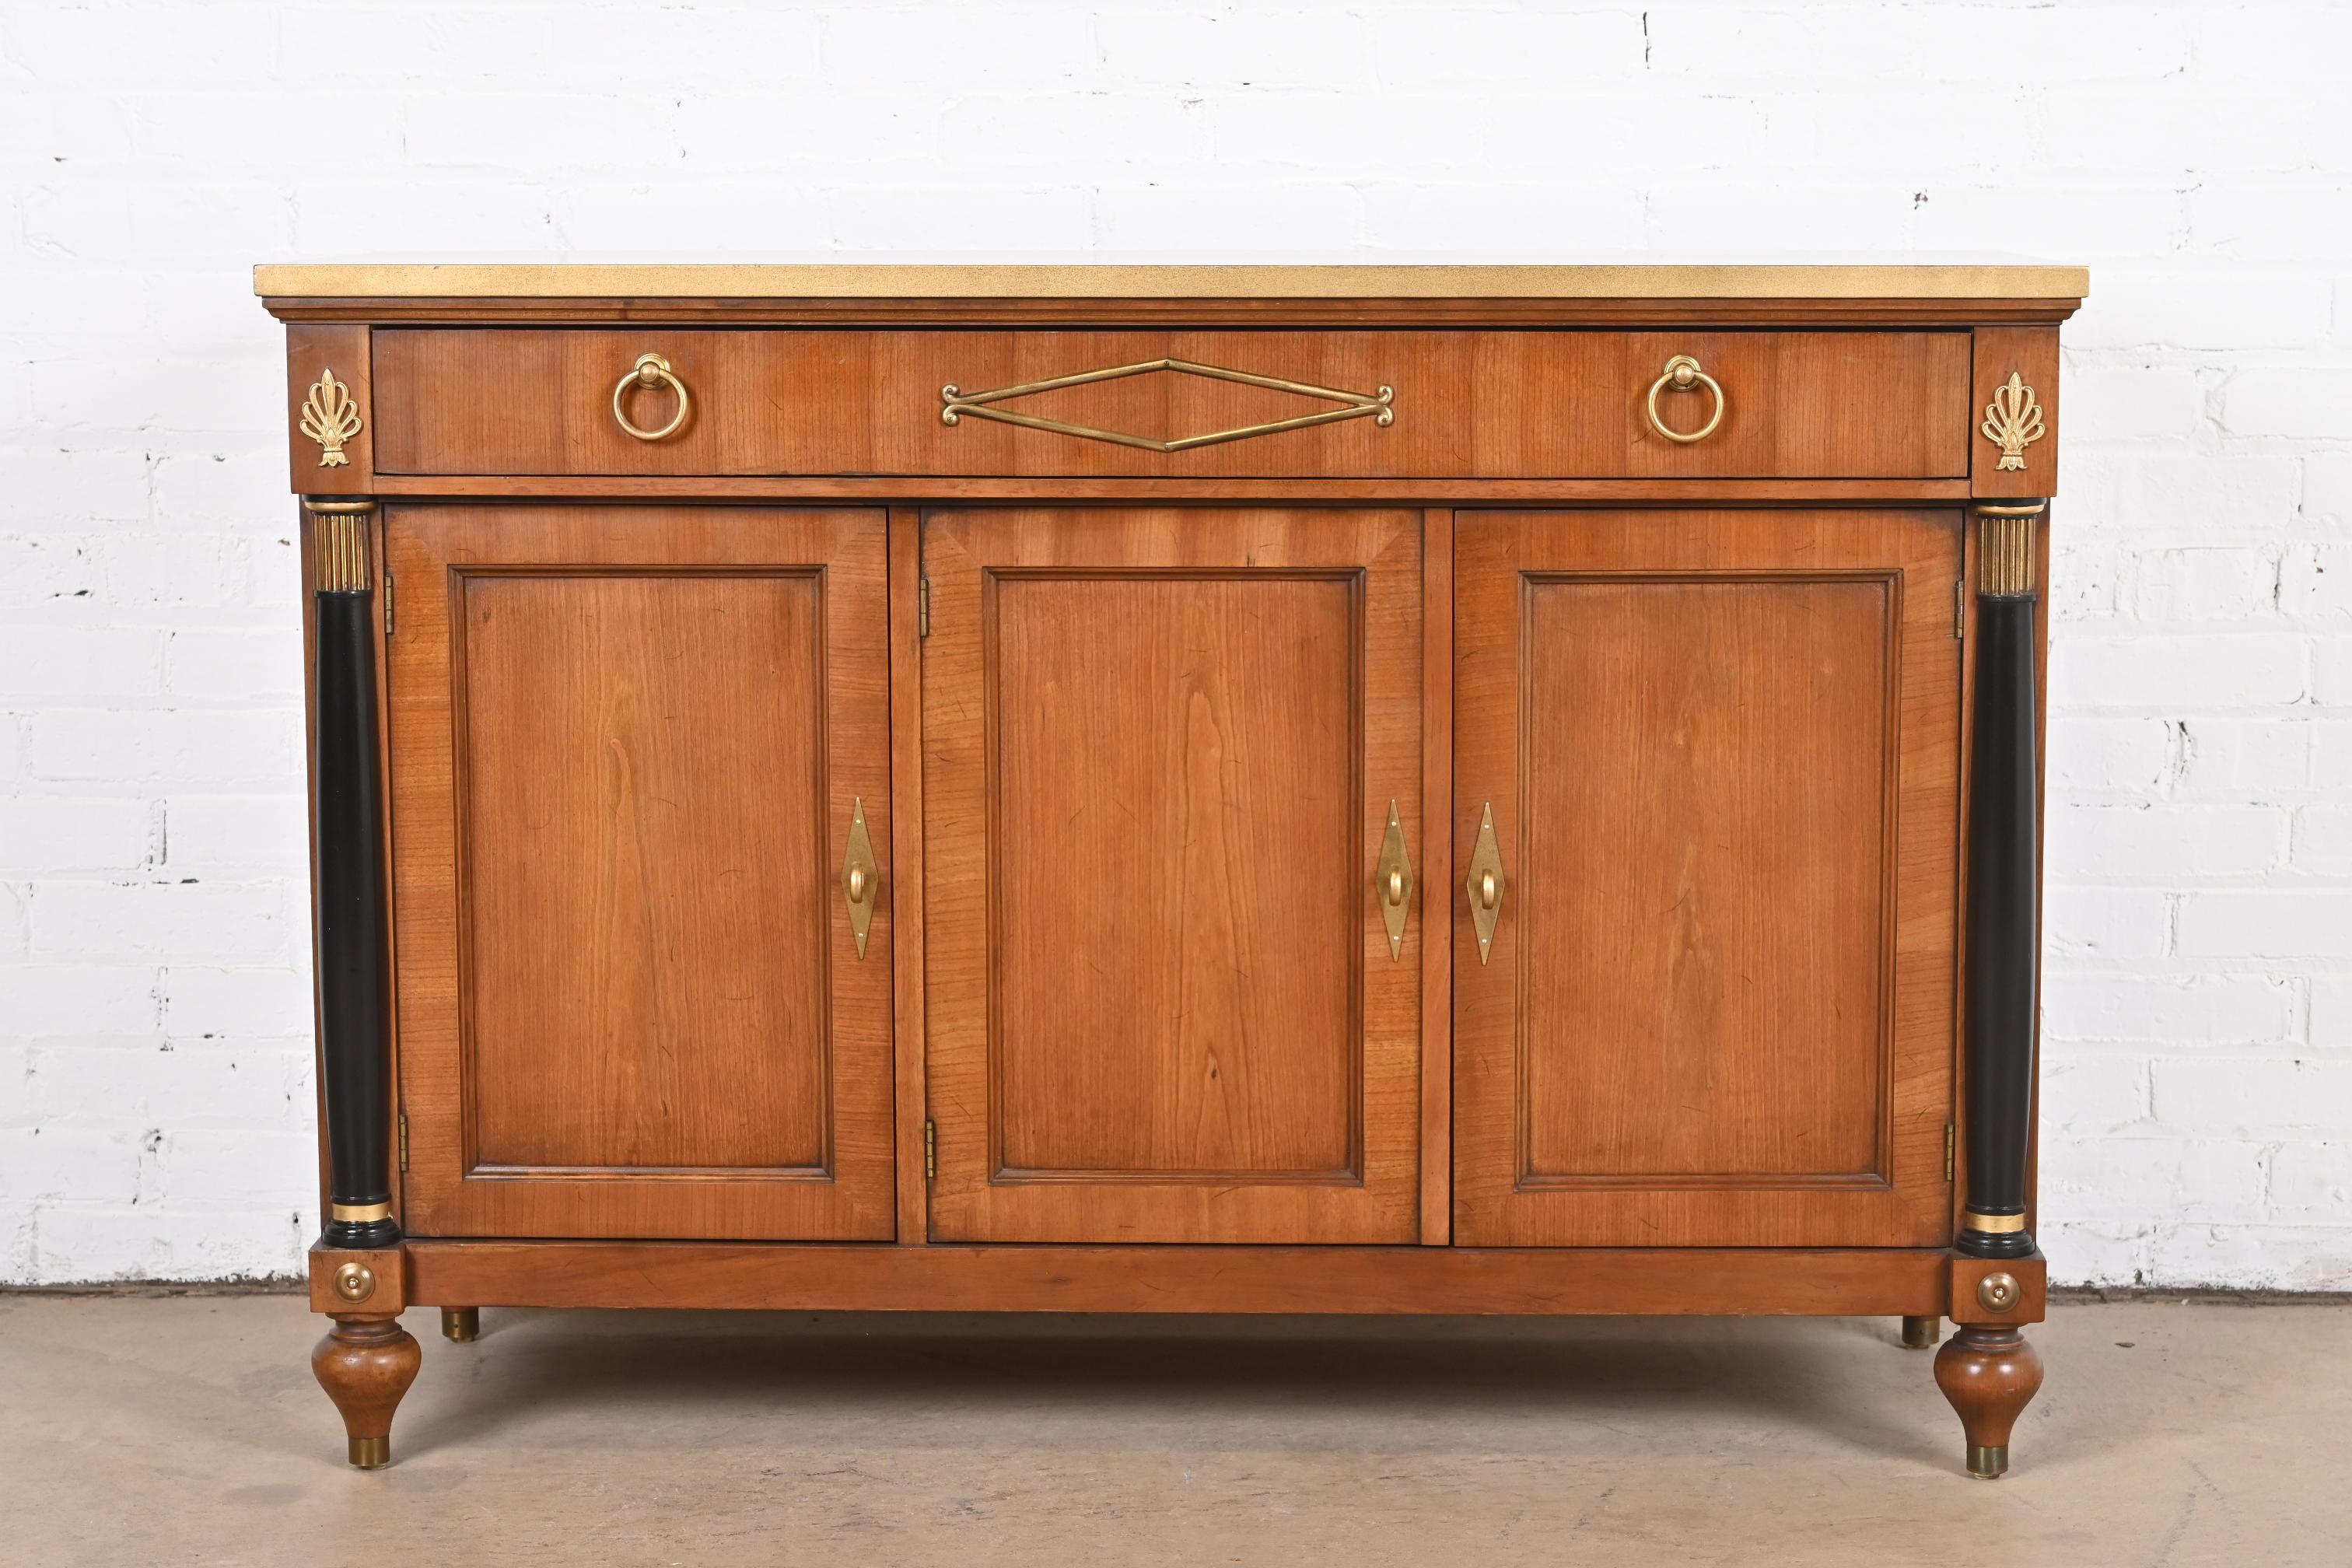 American Baker Furniture Neoclassical Cherry, Gold Gilt, and Parcel Ebonized Sideboard